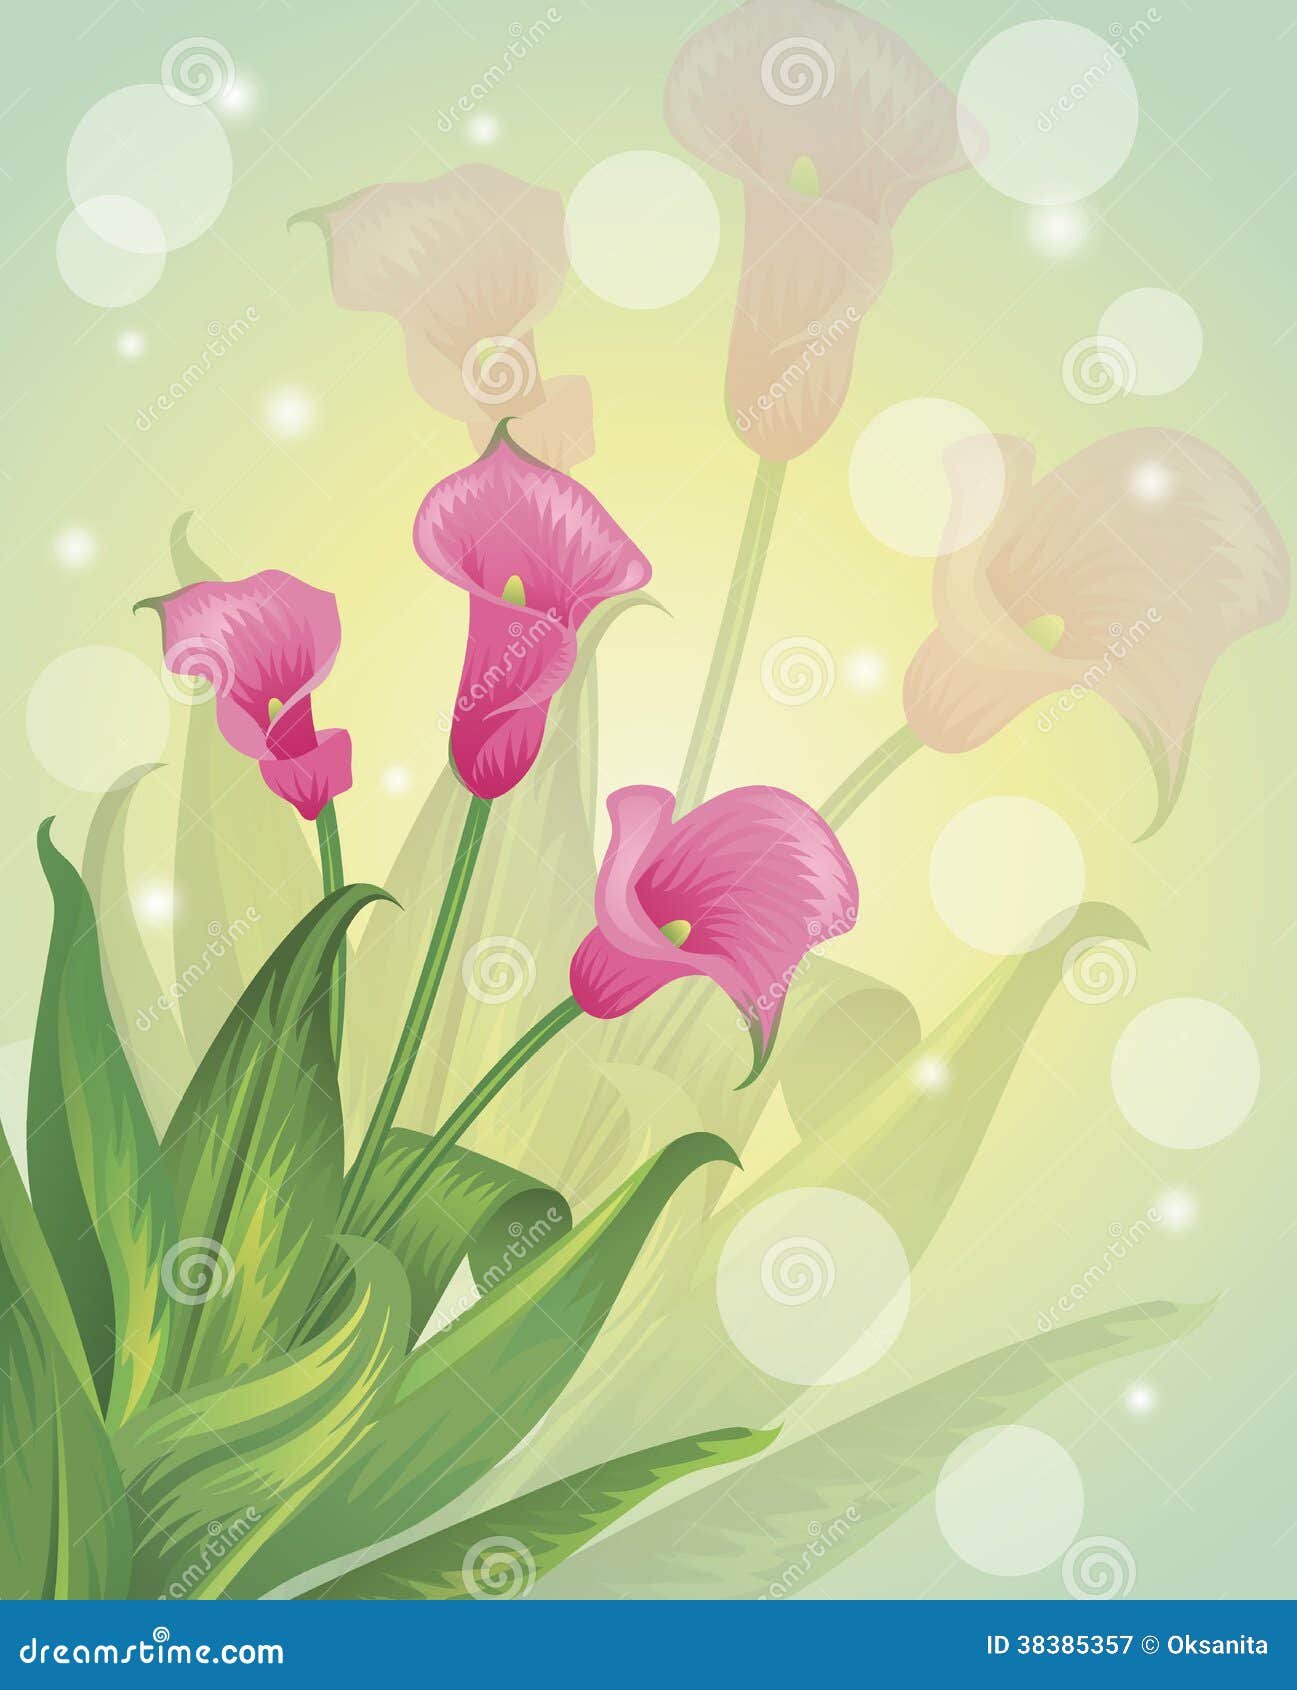 Flower background. stock vector. Illustration of aromatherapy - 38385357